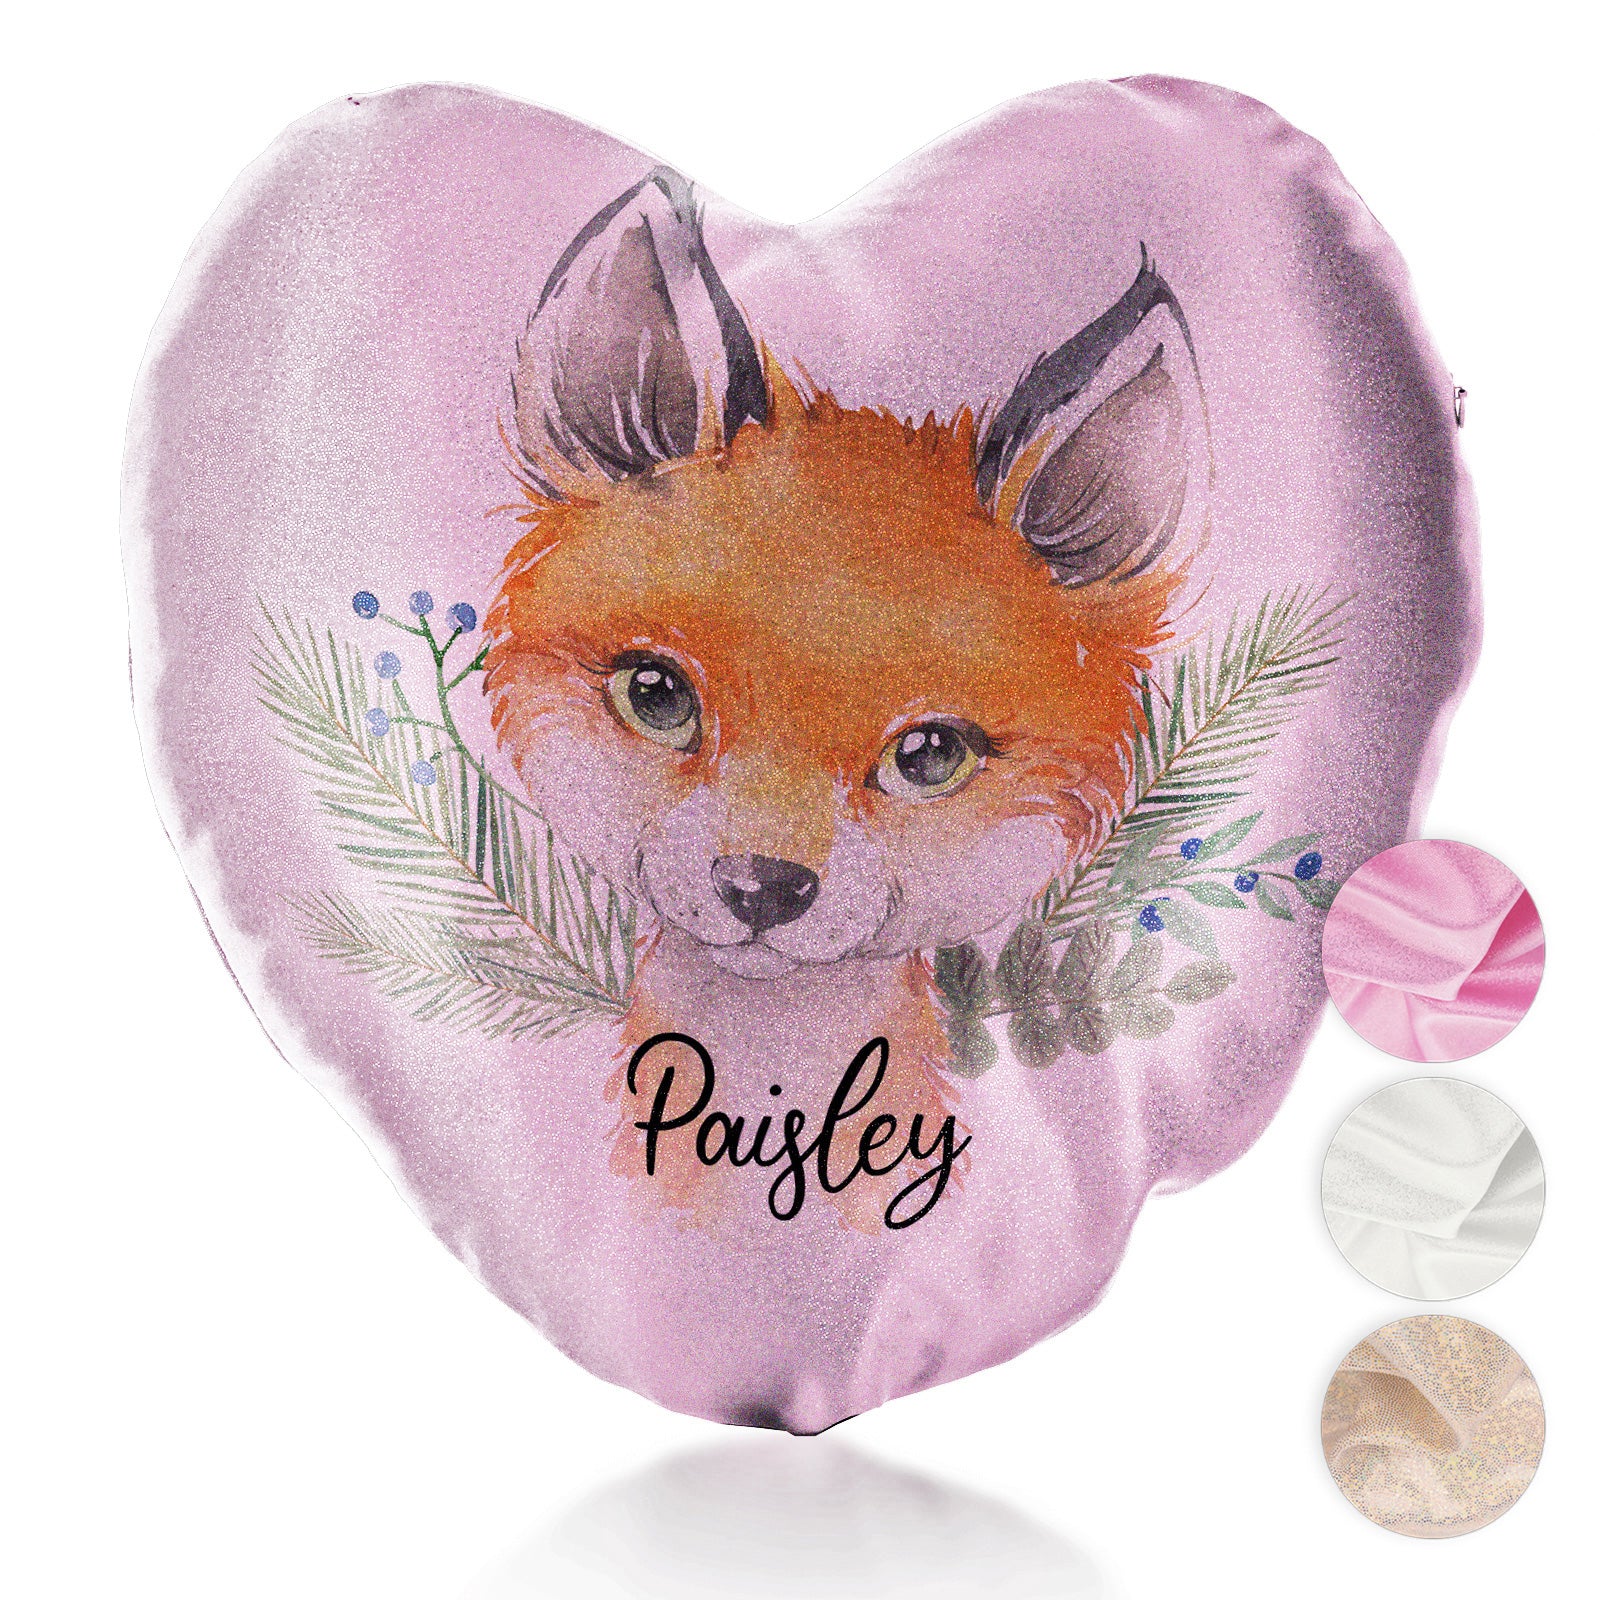 Personalised Glitter Heart Cushion with Red Fox Blue Berries and Cute Text